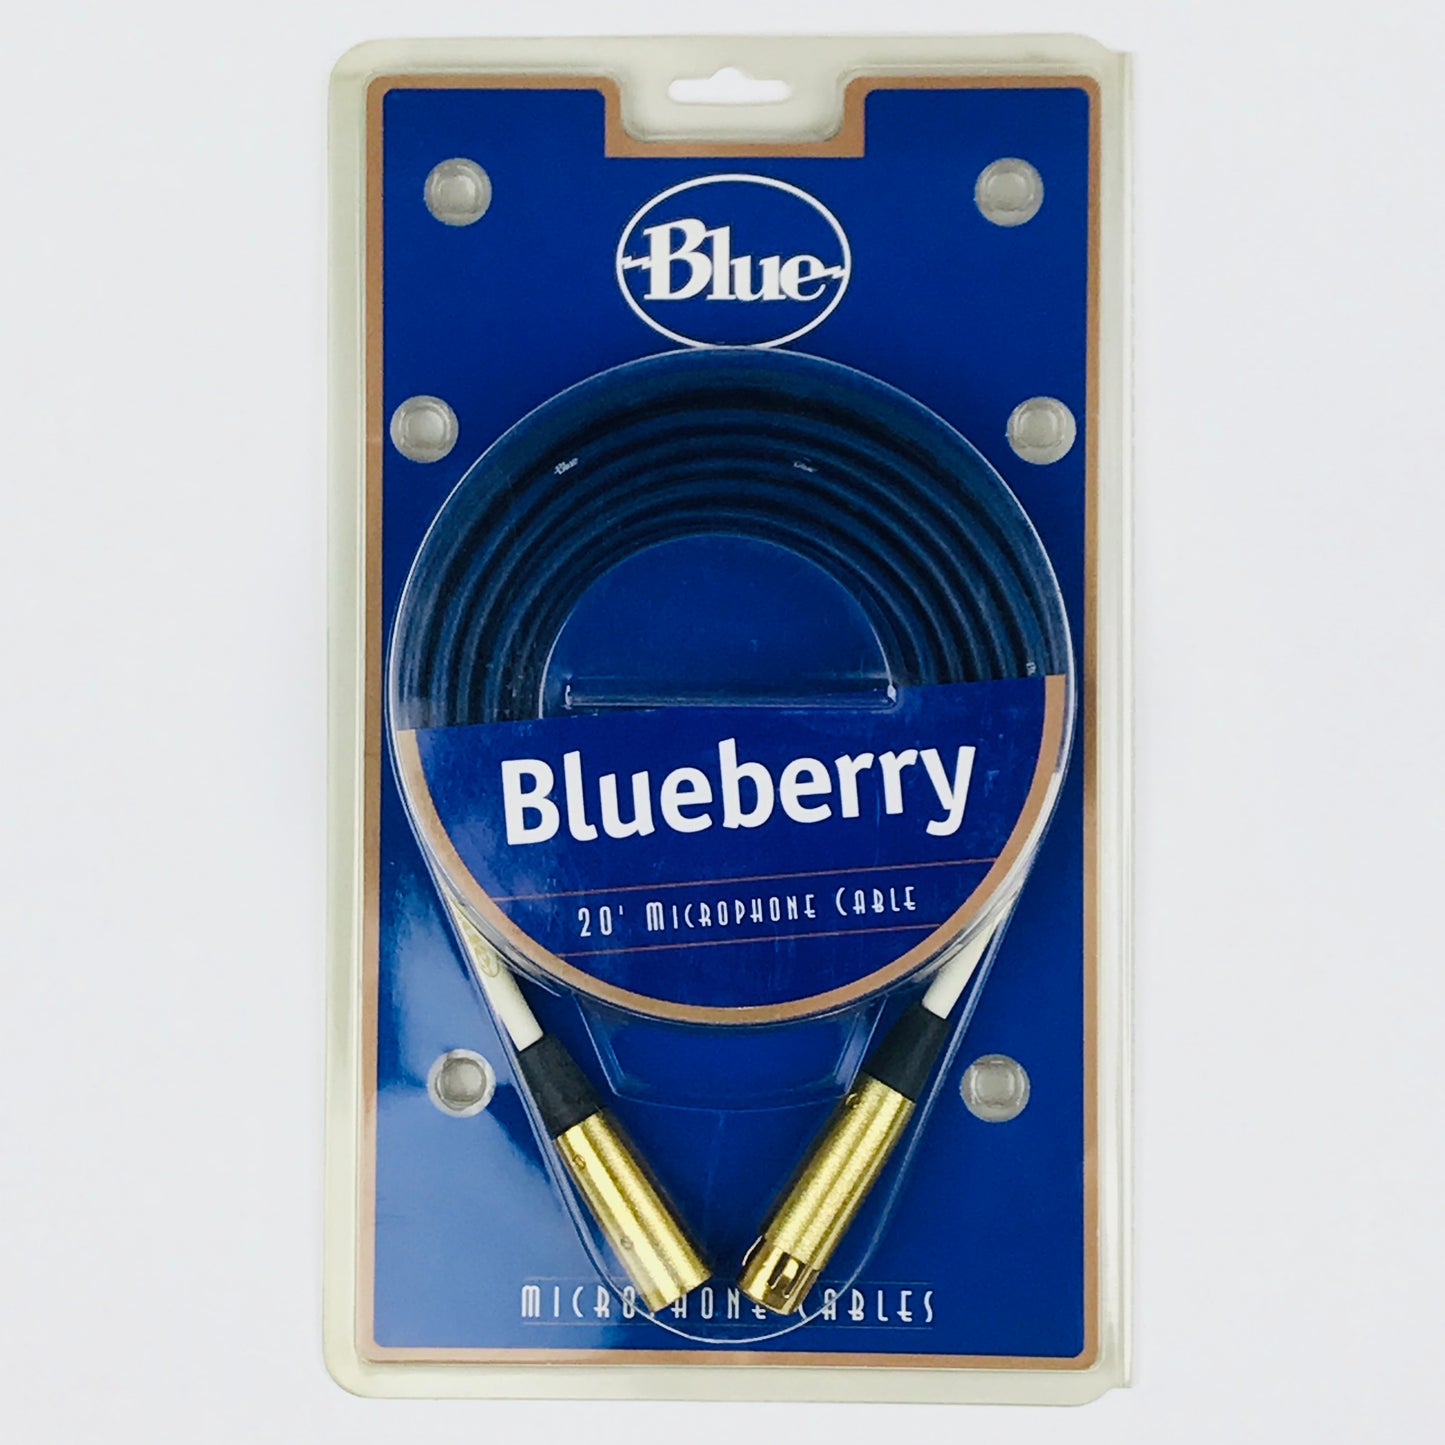 Blue - Blueberry 20' Microphone Cable